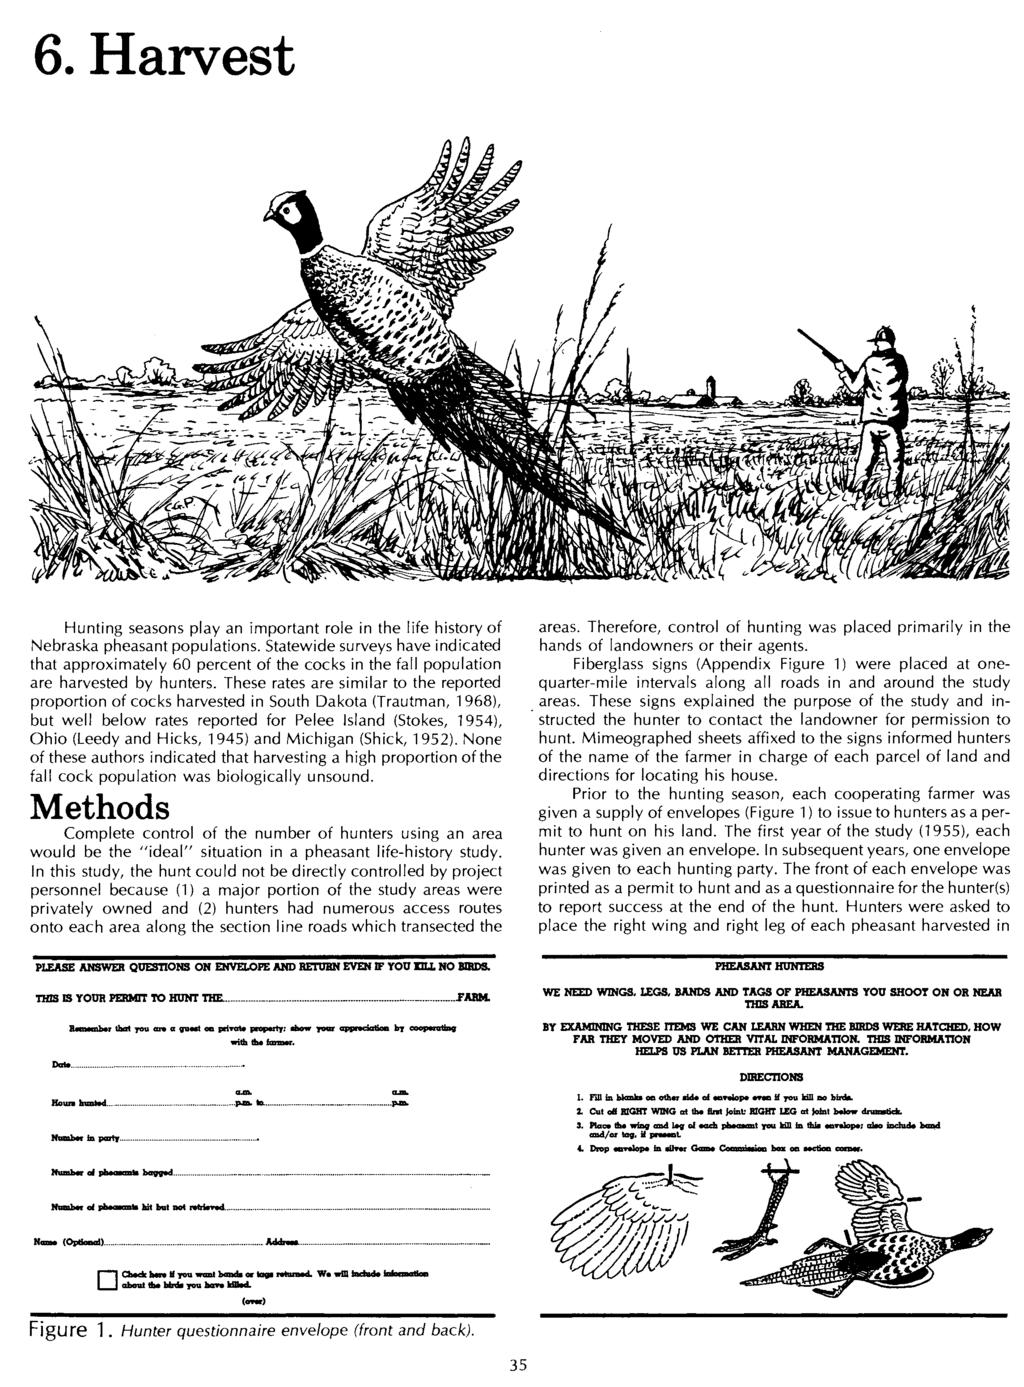 6. Harvest Hunting seasons play an important role in the life history of Nebraska pheasant populations.